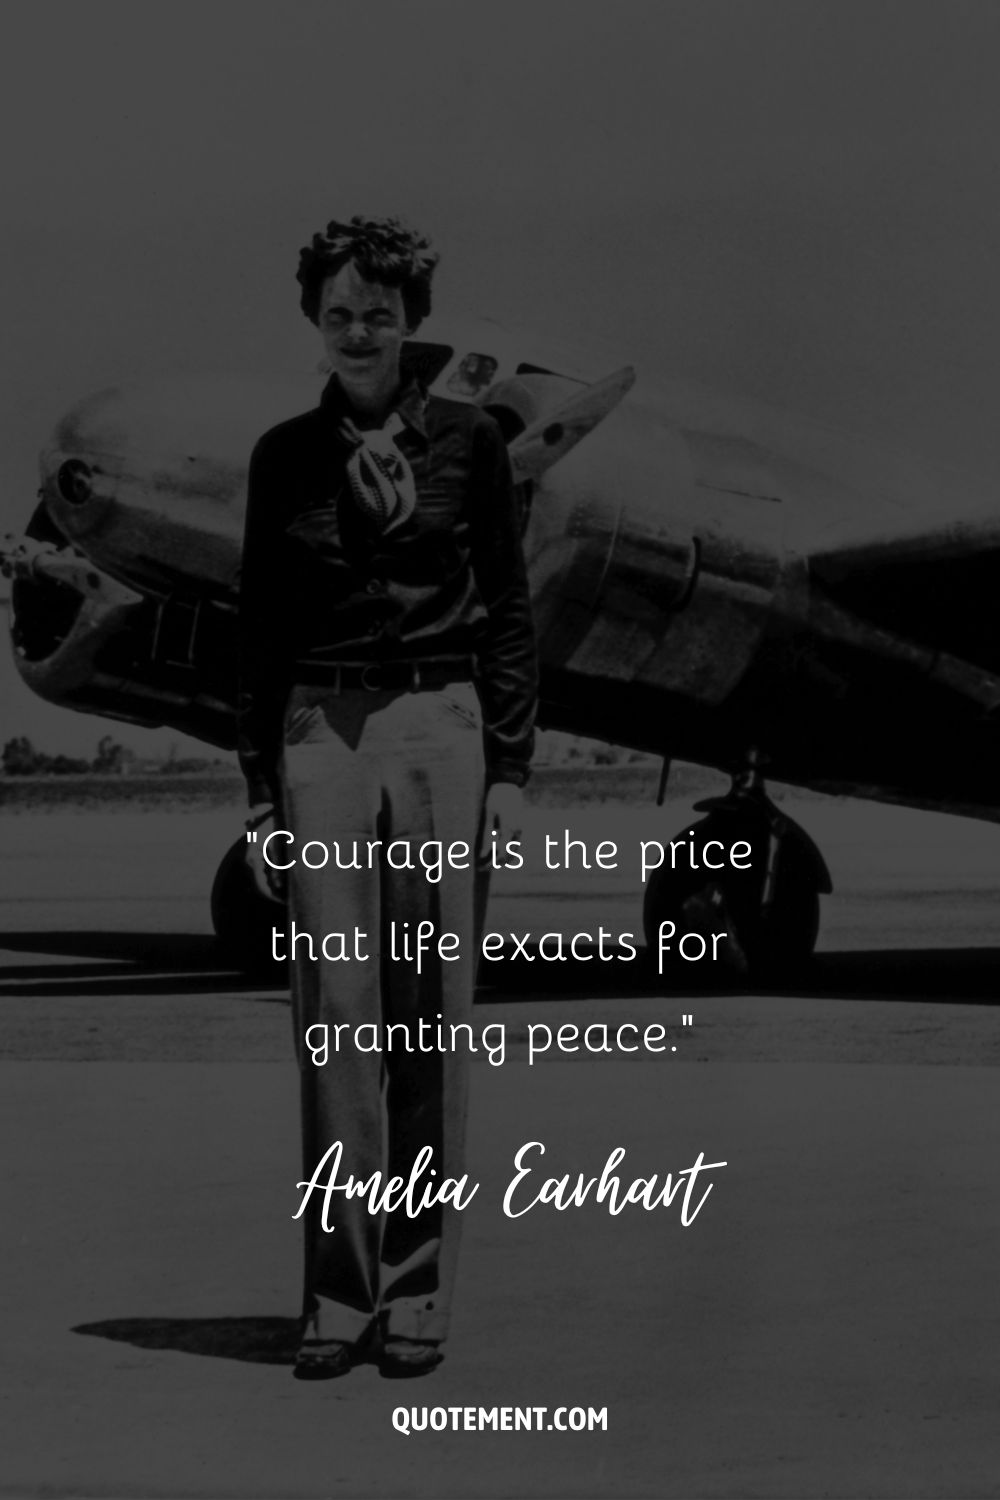 “Courage is the price that life exacts for granting peace.” ― Amelia Earhart